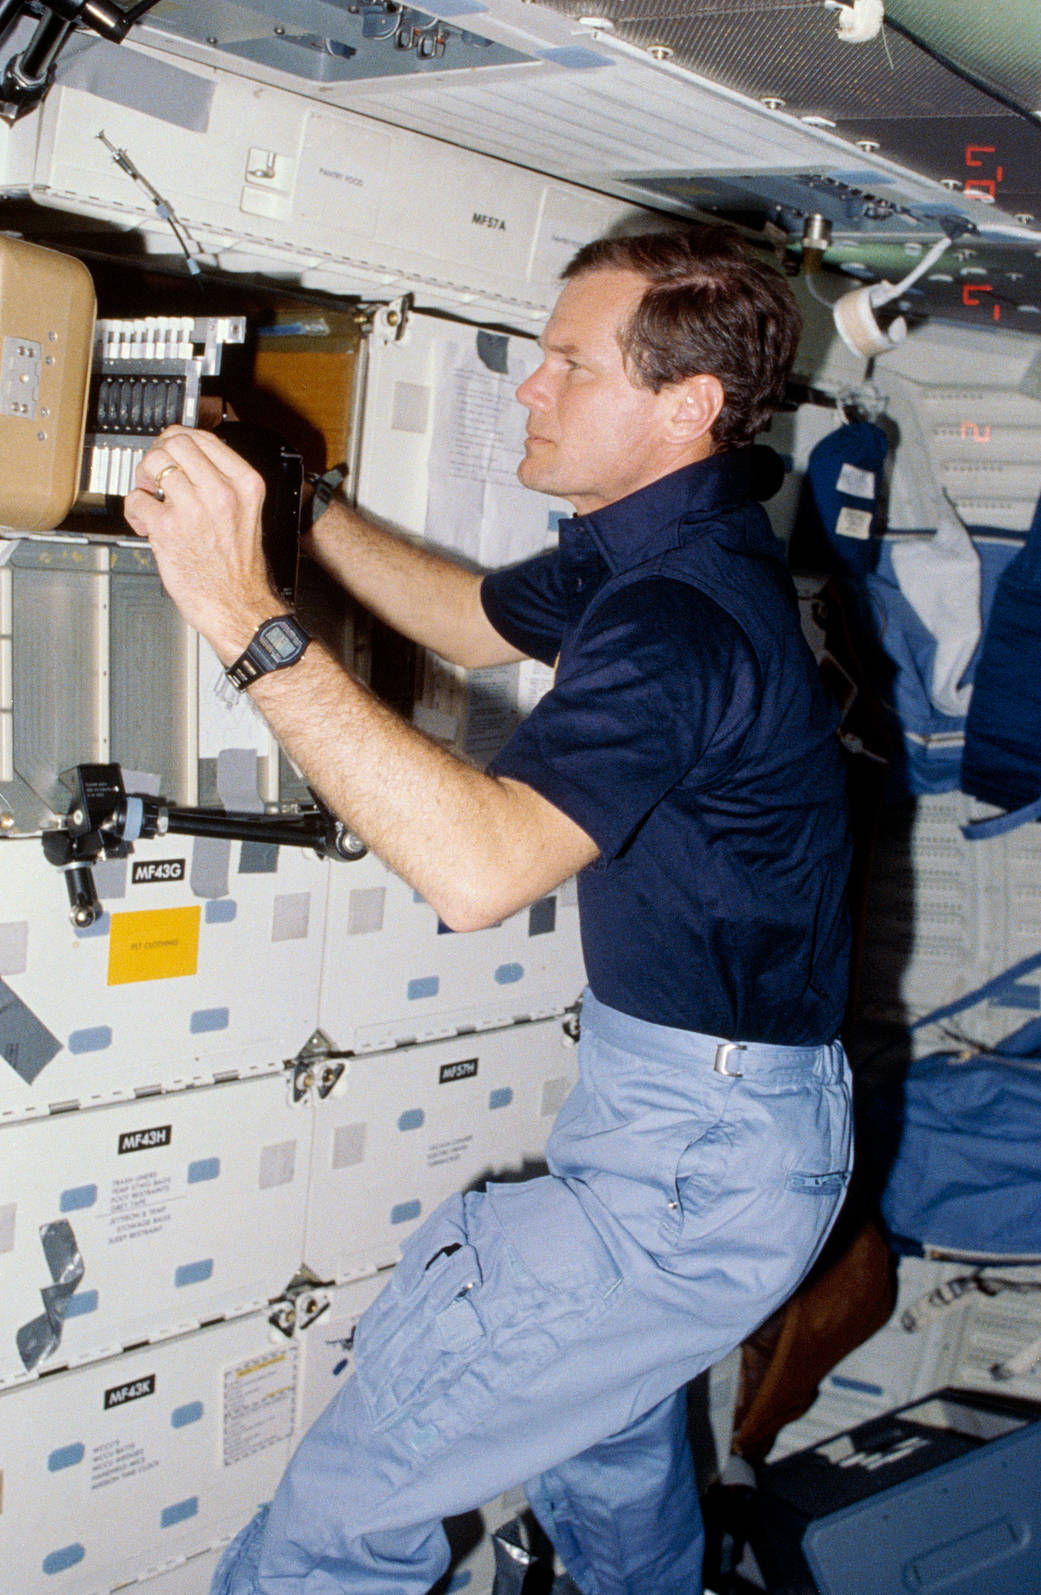 U.S. Representative Bill Nelson (now NASA Administrator), STS-61C payload specialist, prepares to photograph individual samples in the Handheld Protein Crystal Growth Experiment (HPCG) on space shuttle Columbia's middeck. 